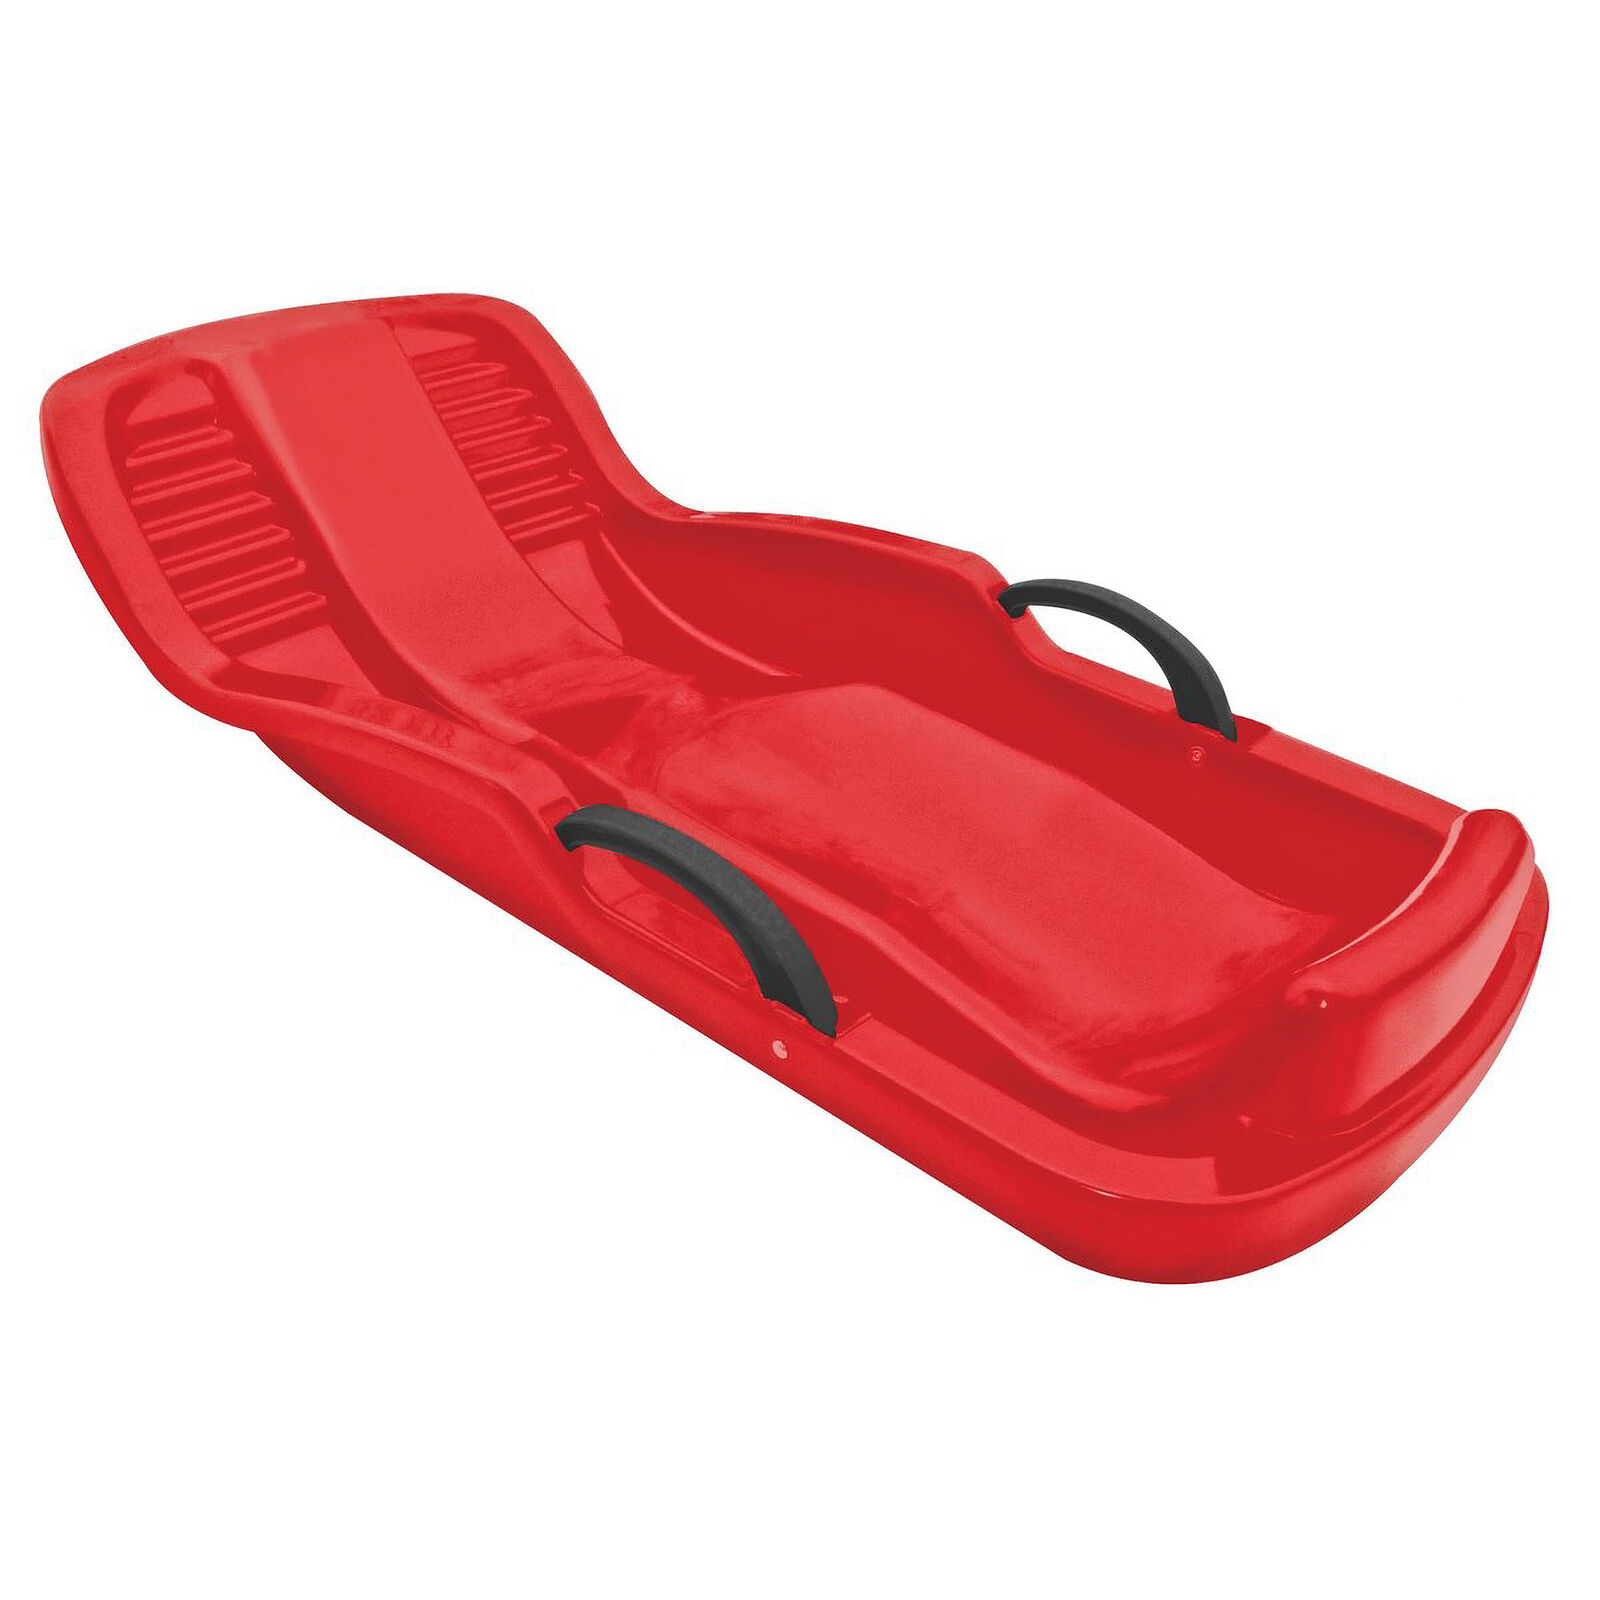 Paricon Flexible Flyer Winter Heat Sled W/ Brakes, Ages 4 And Up, 38 Inches